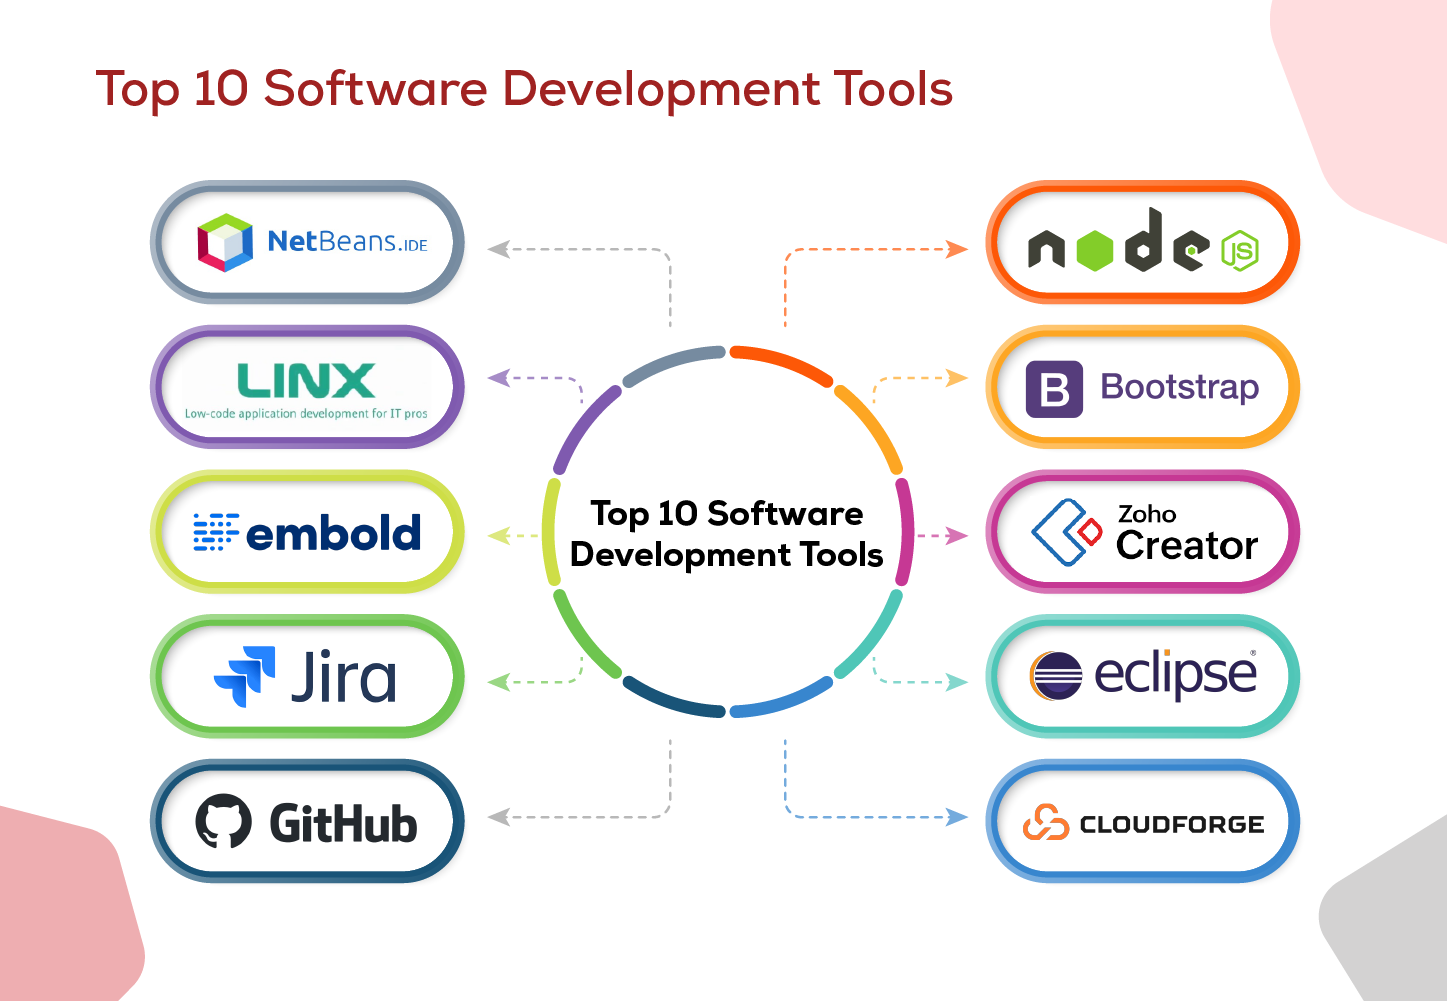 Software Development: Tools of the trade